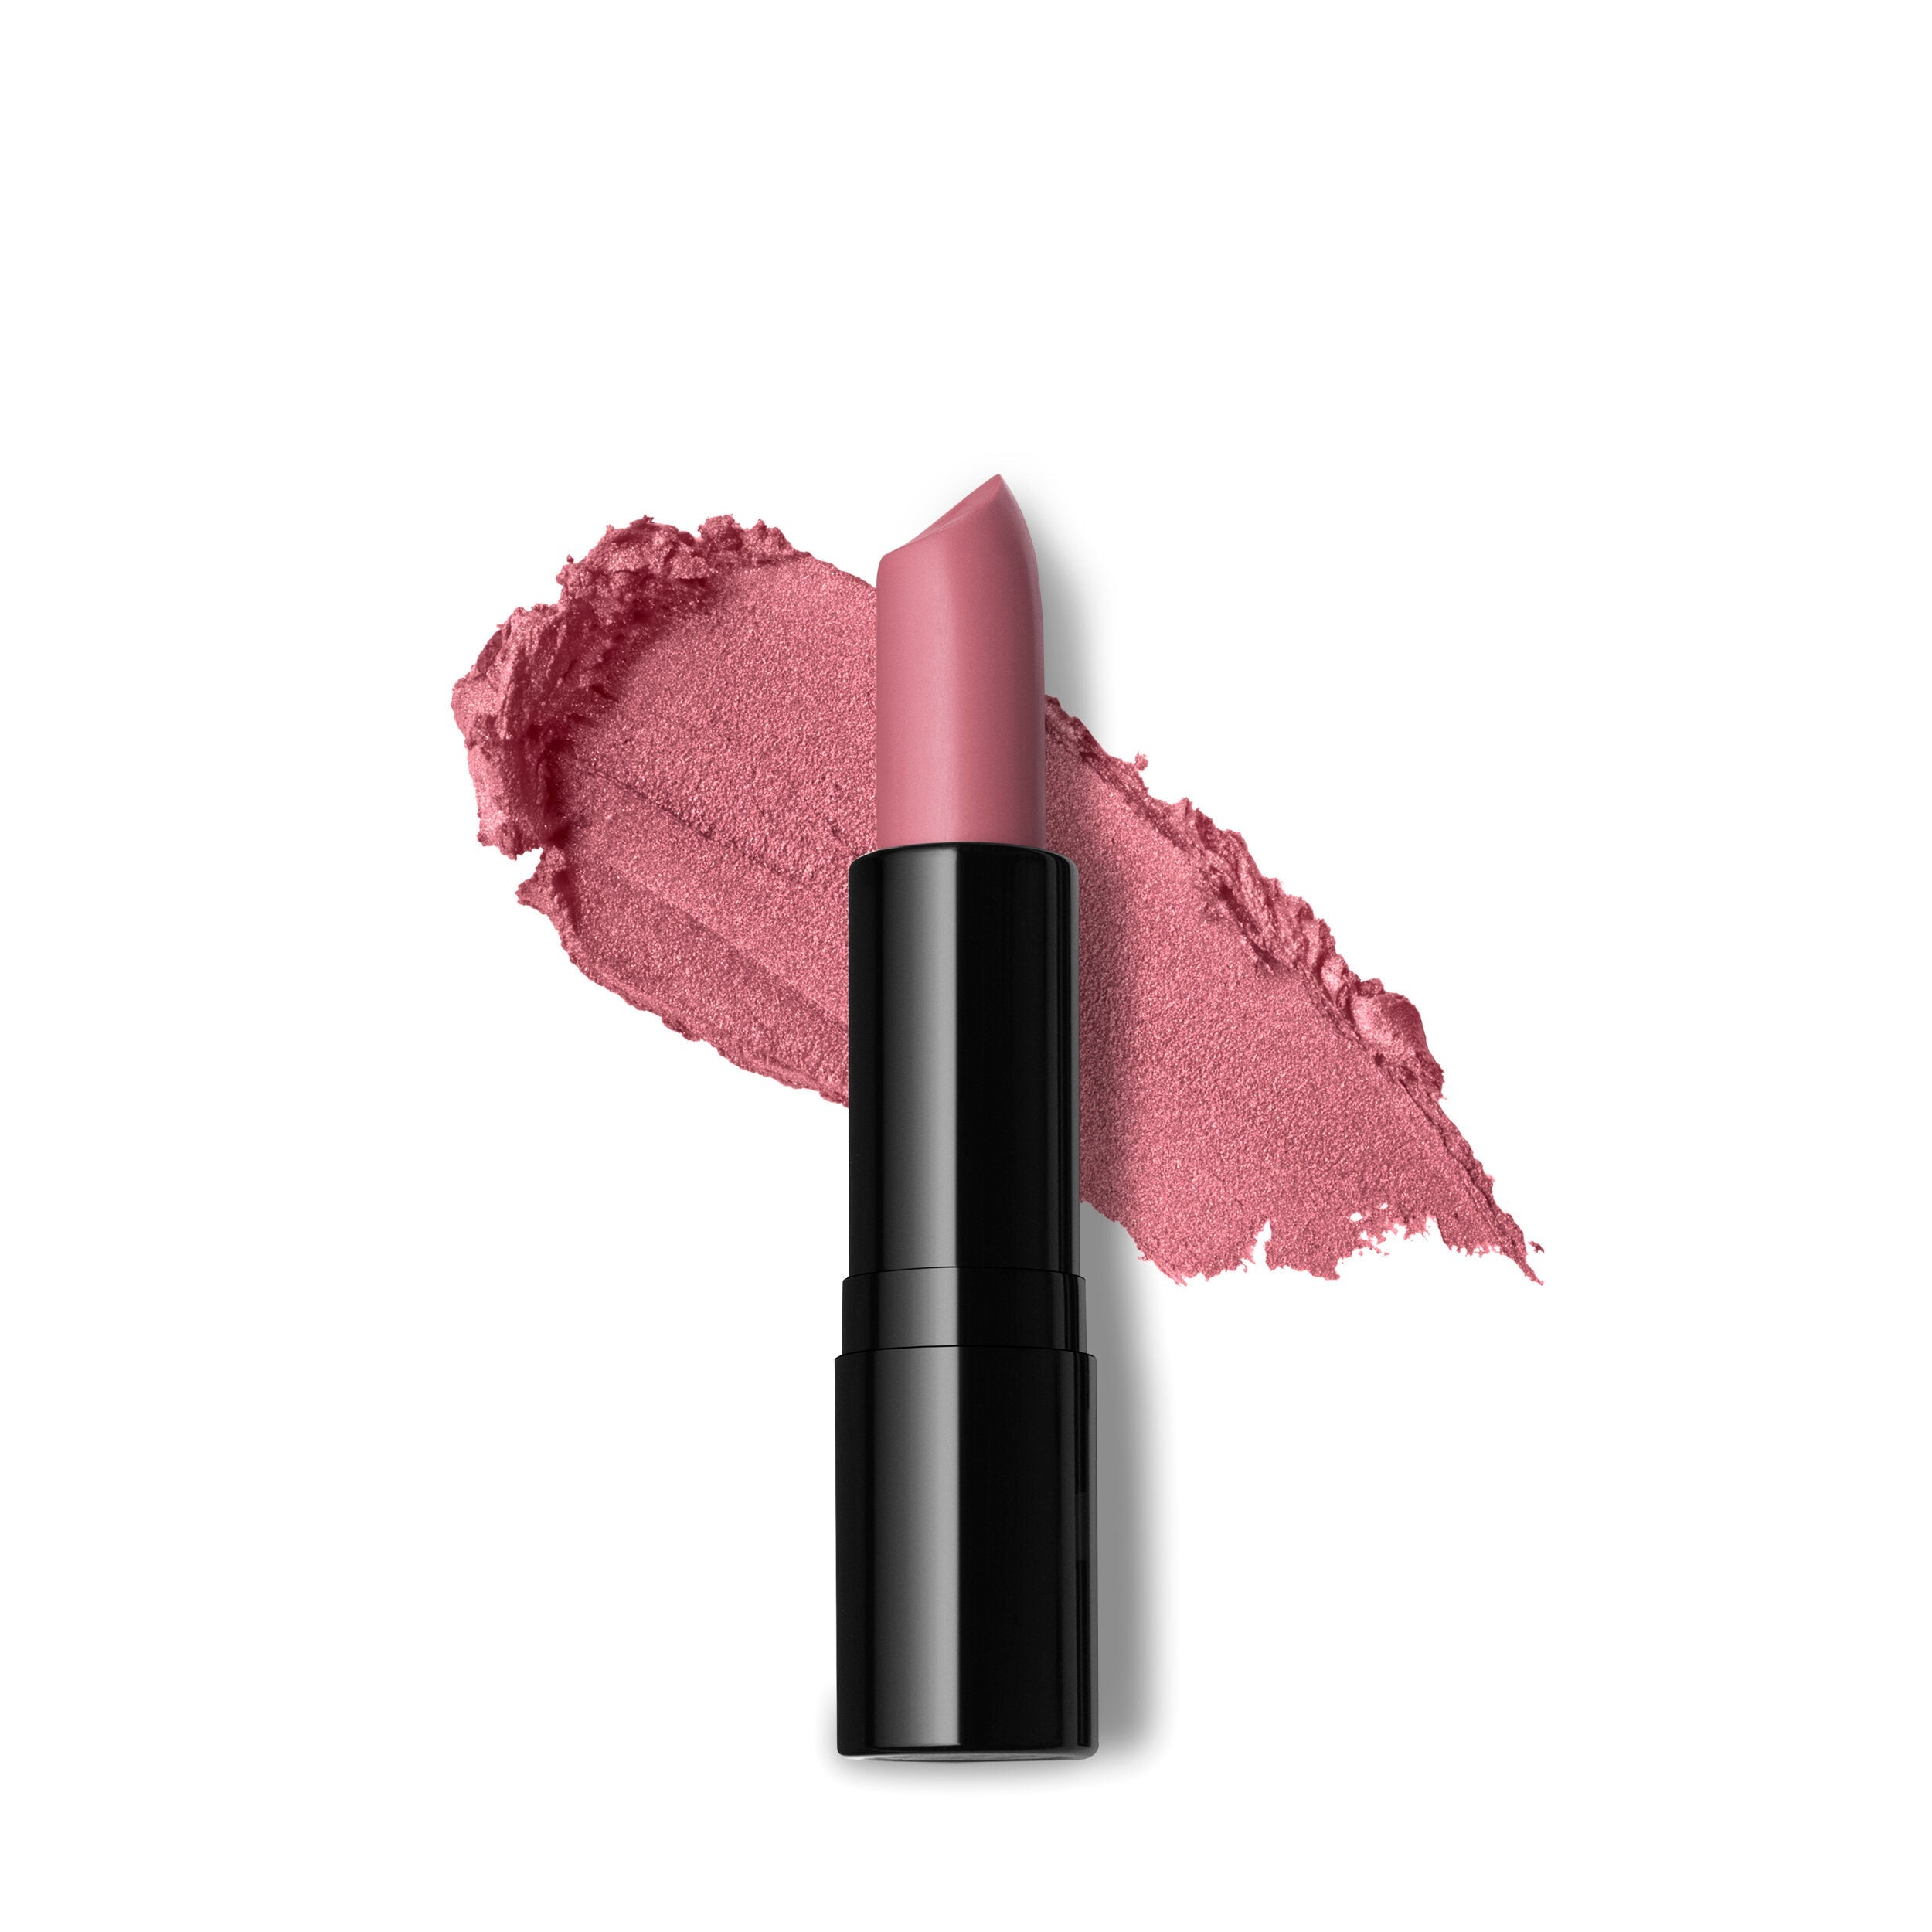 Kate Luxury Matte Finish Lipstick - Mauve With a Cool Lavender